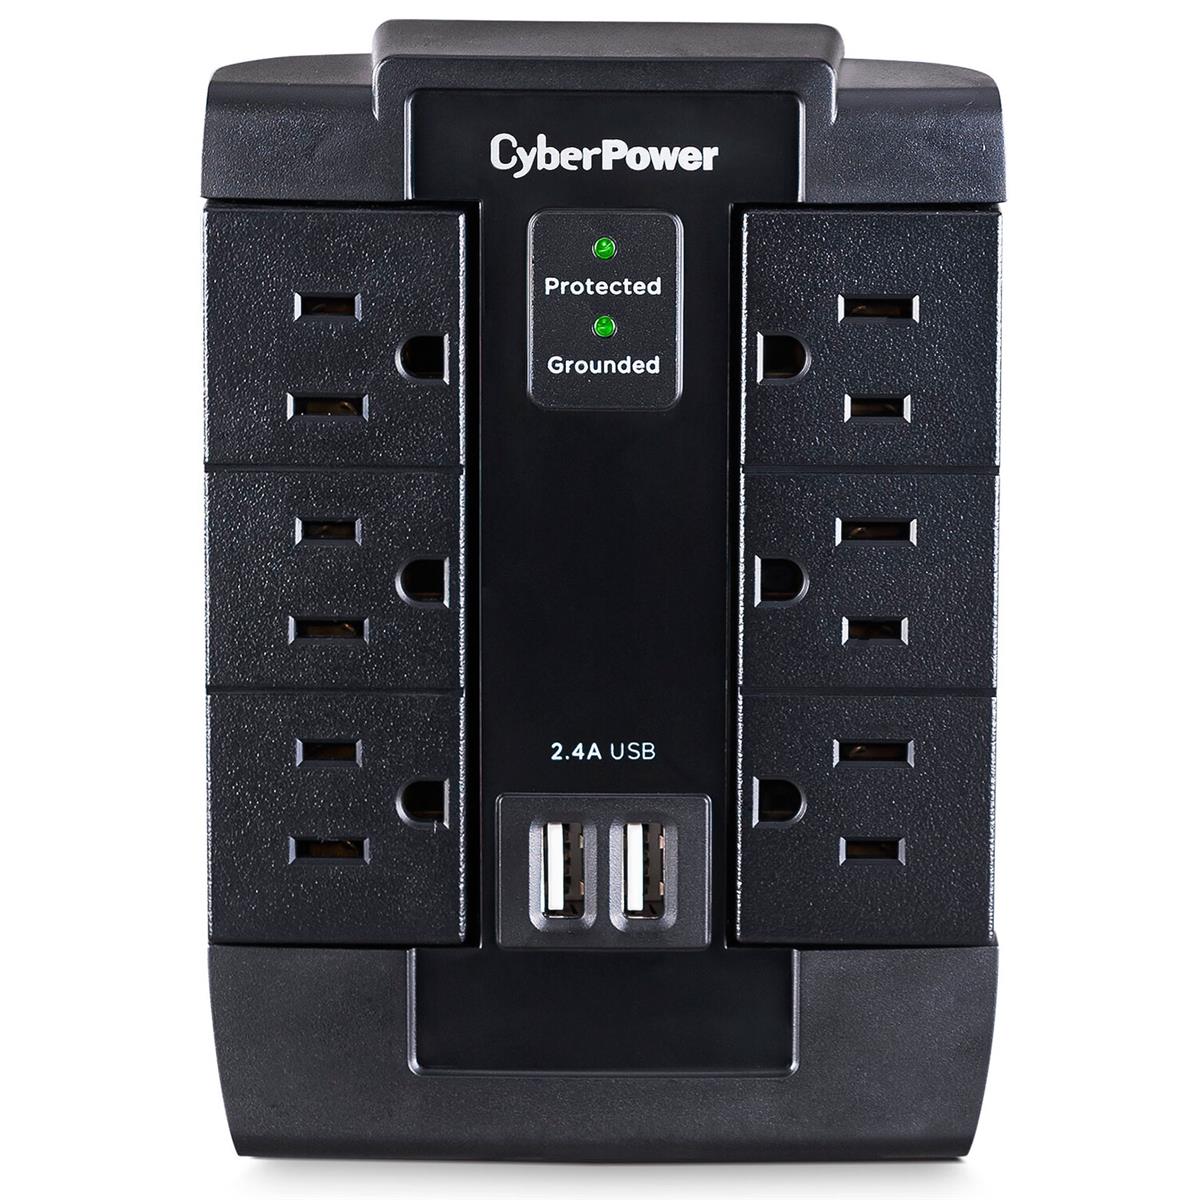 Image of CyberPower CSP600WSU 125V Professional Surge Protector